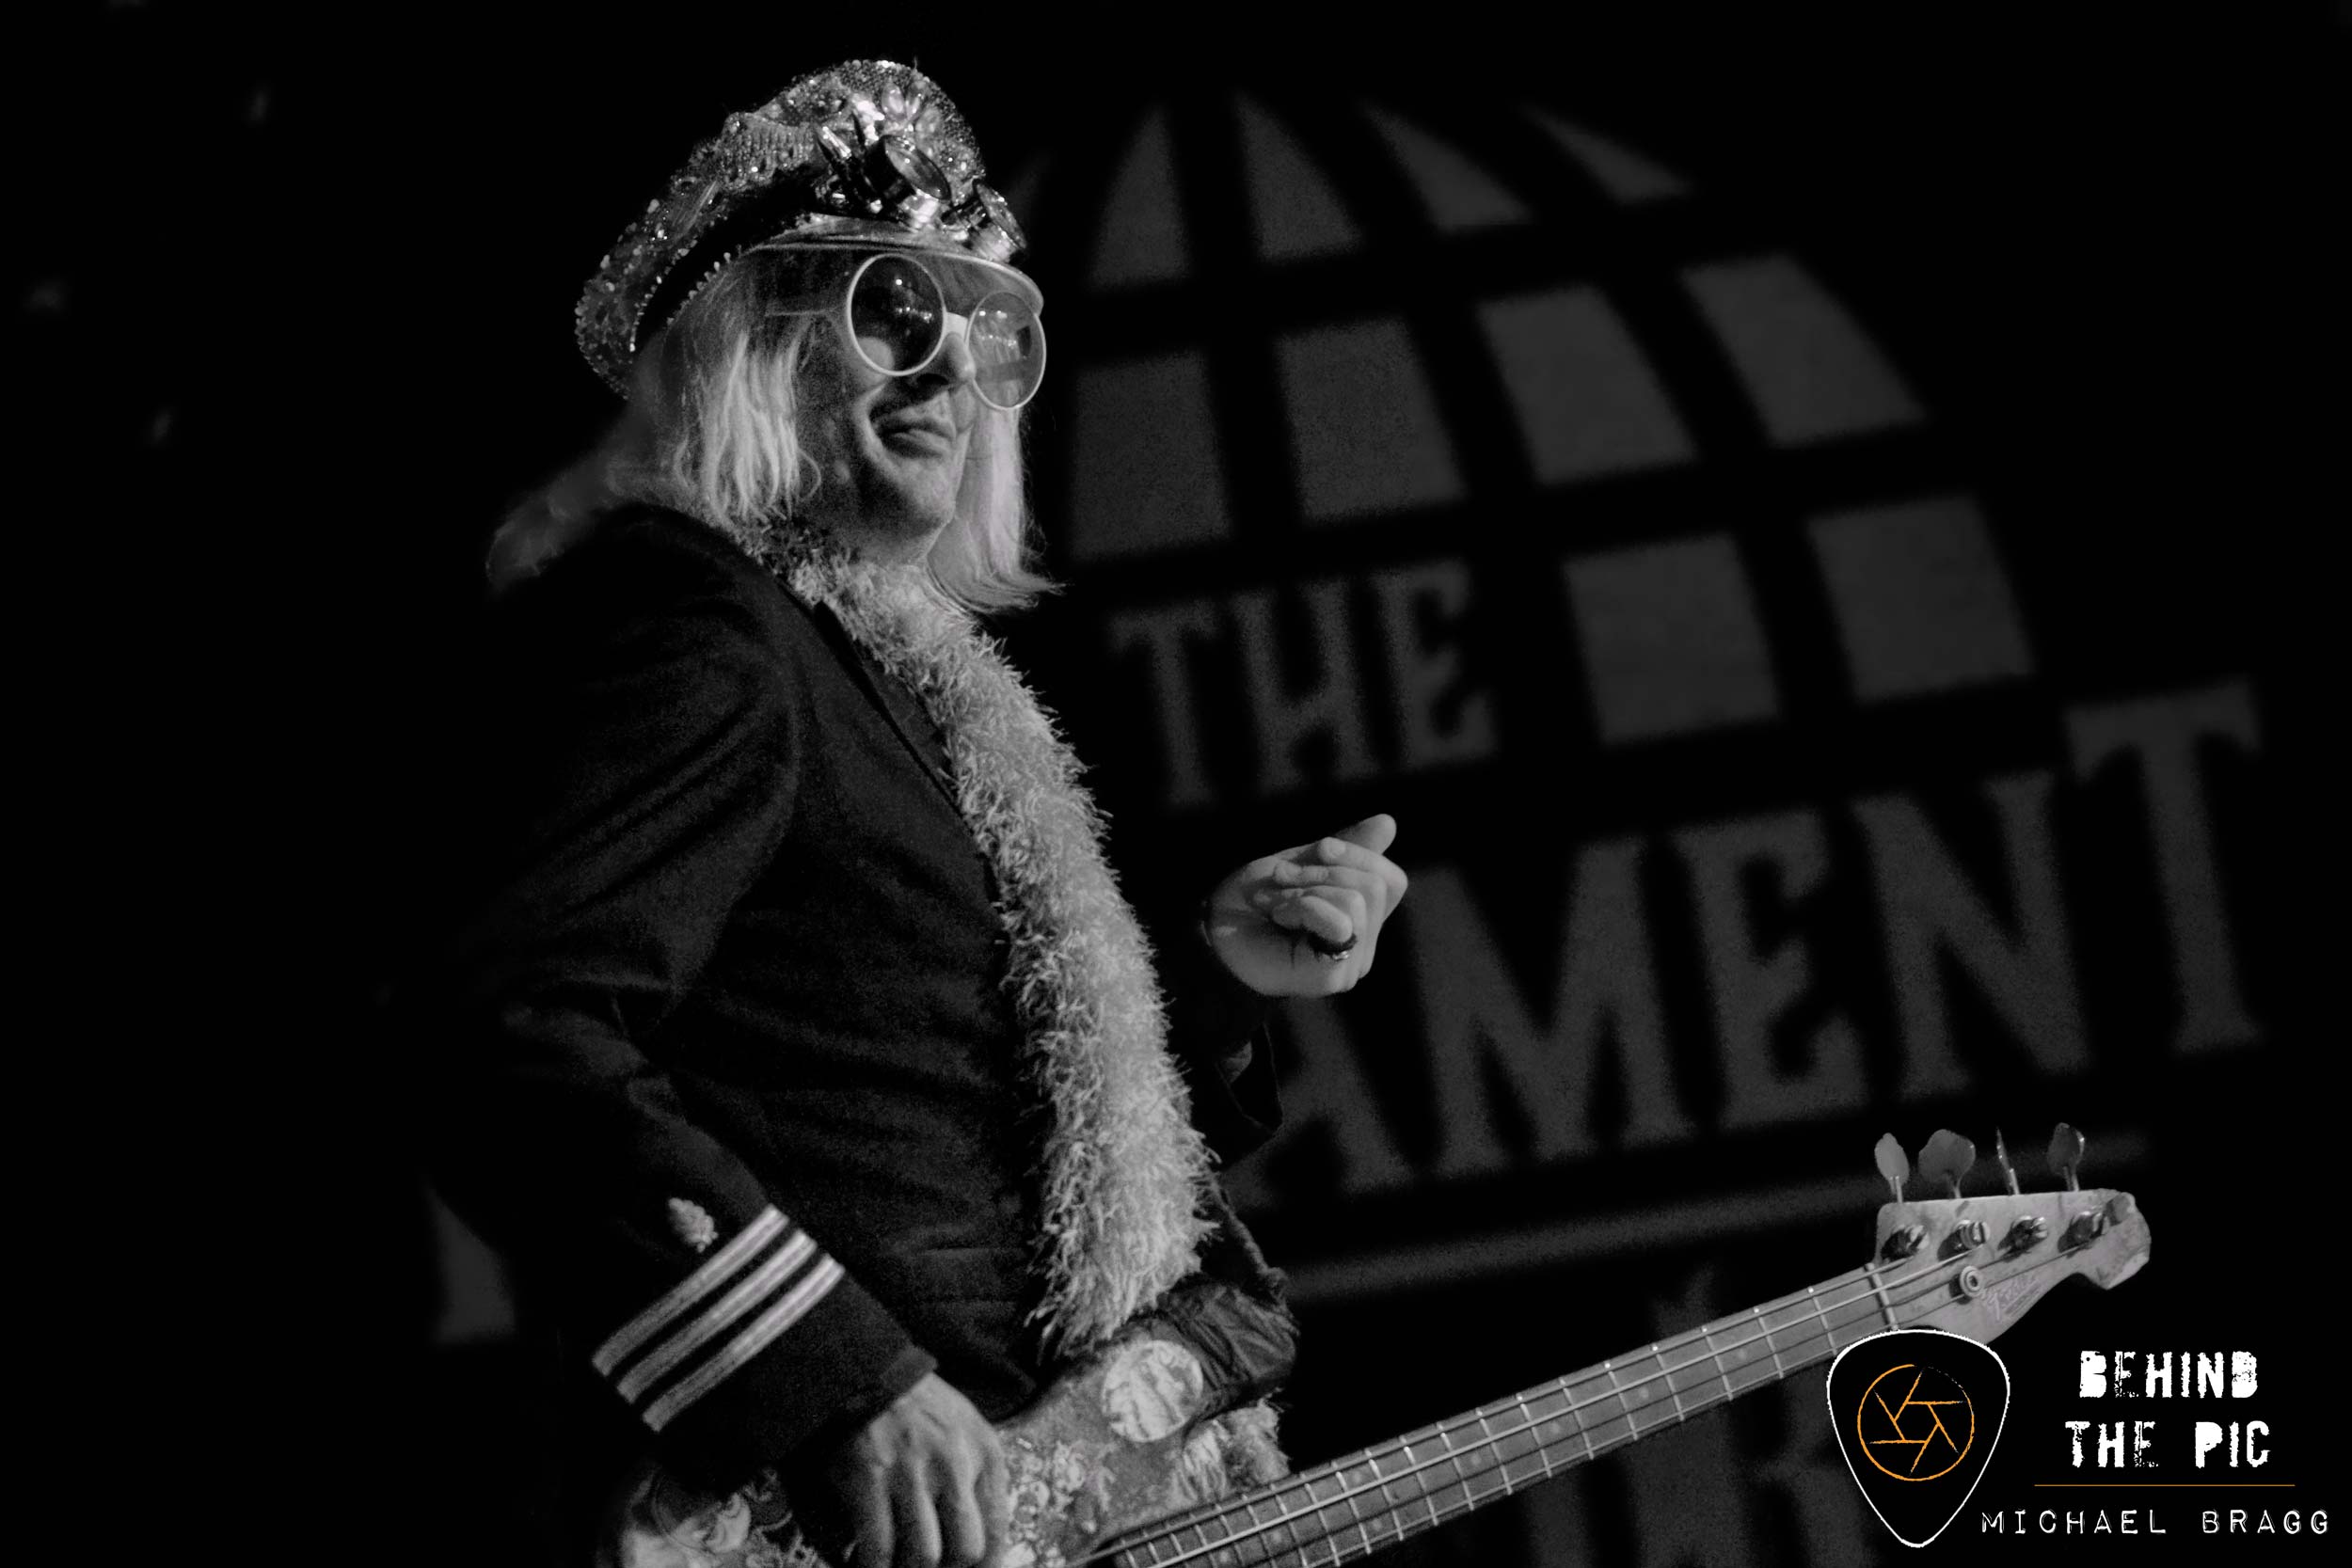 Los Angeles rockers Enuff Z'nuff at The Firmament in Greenville South Carolina